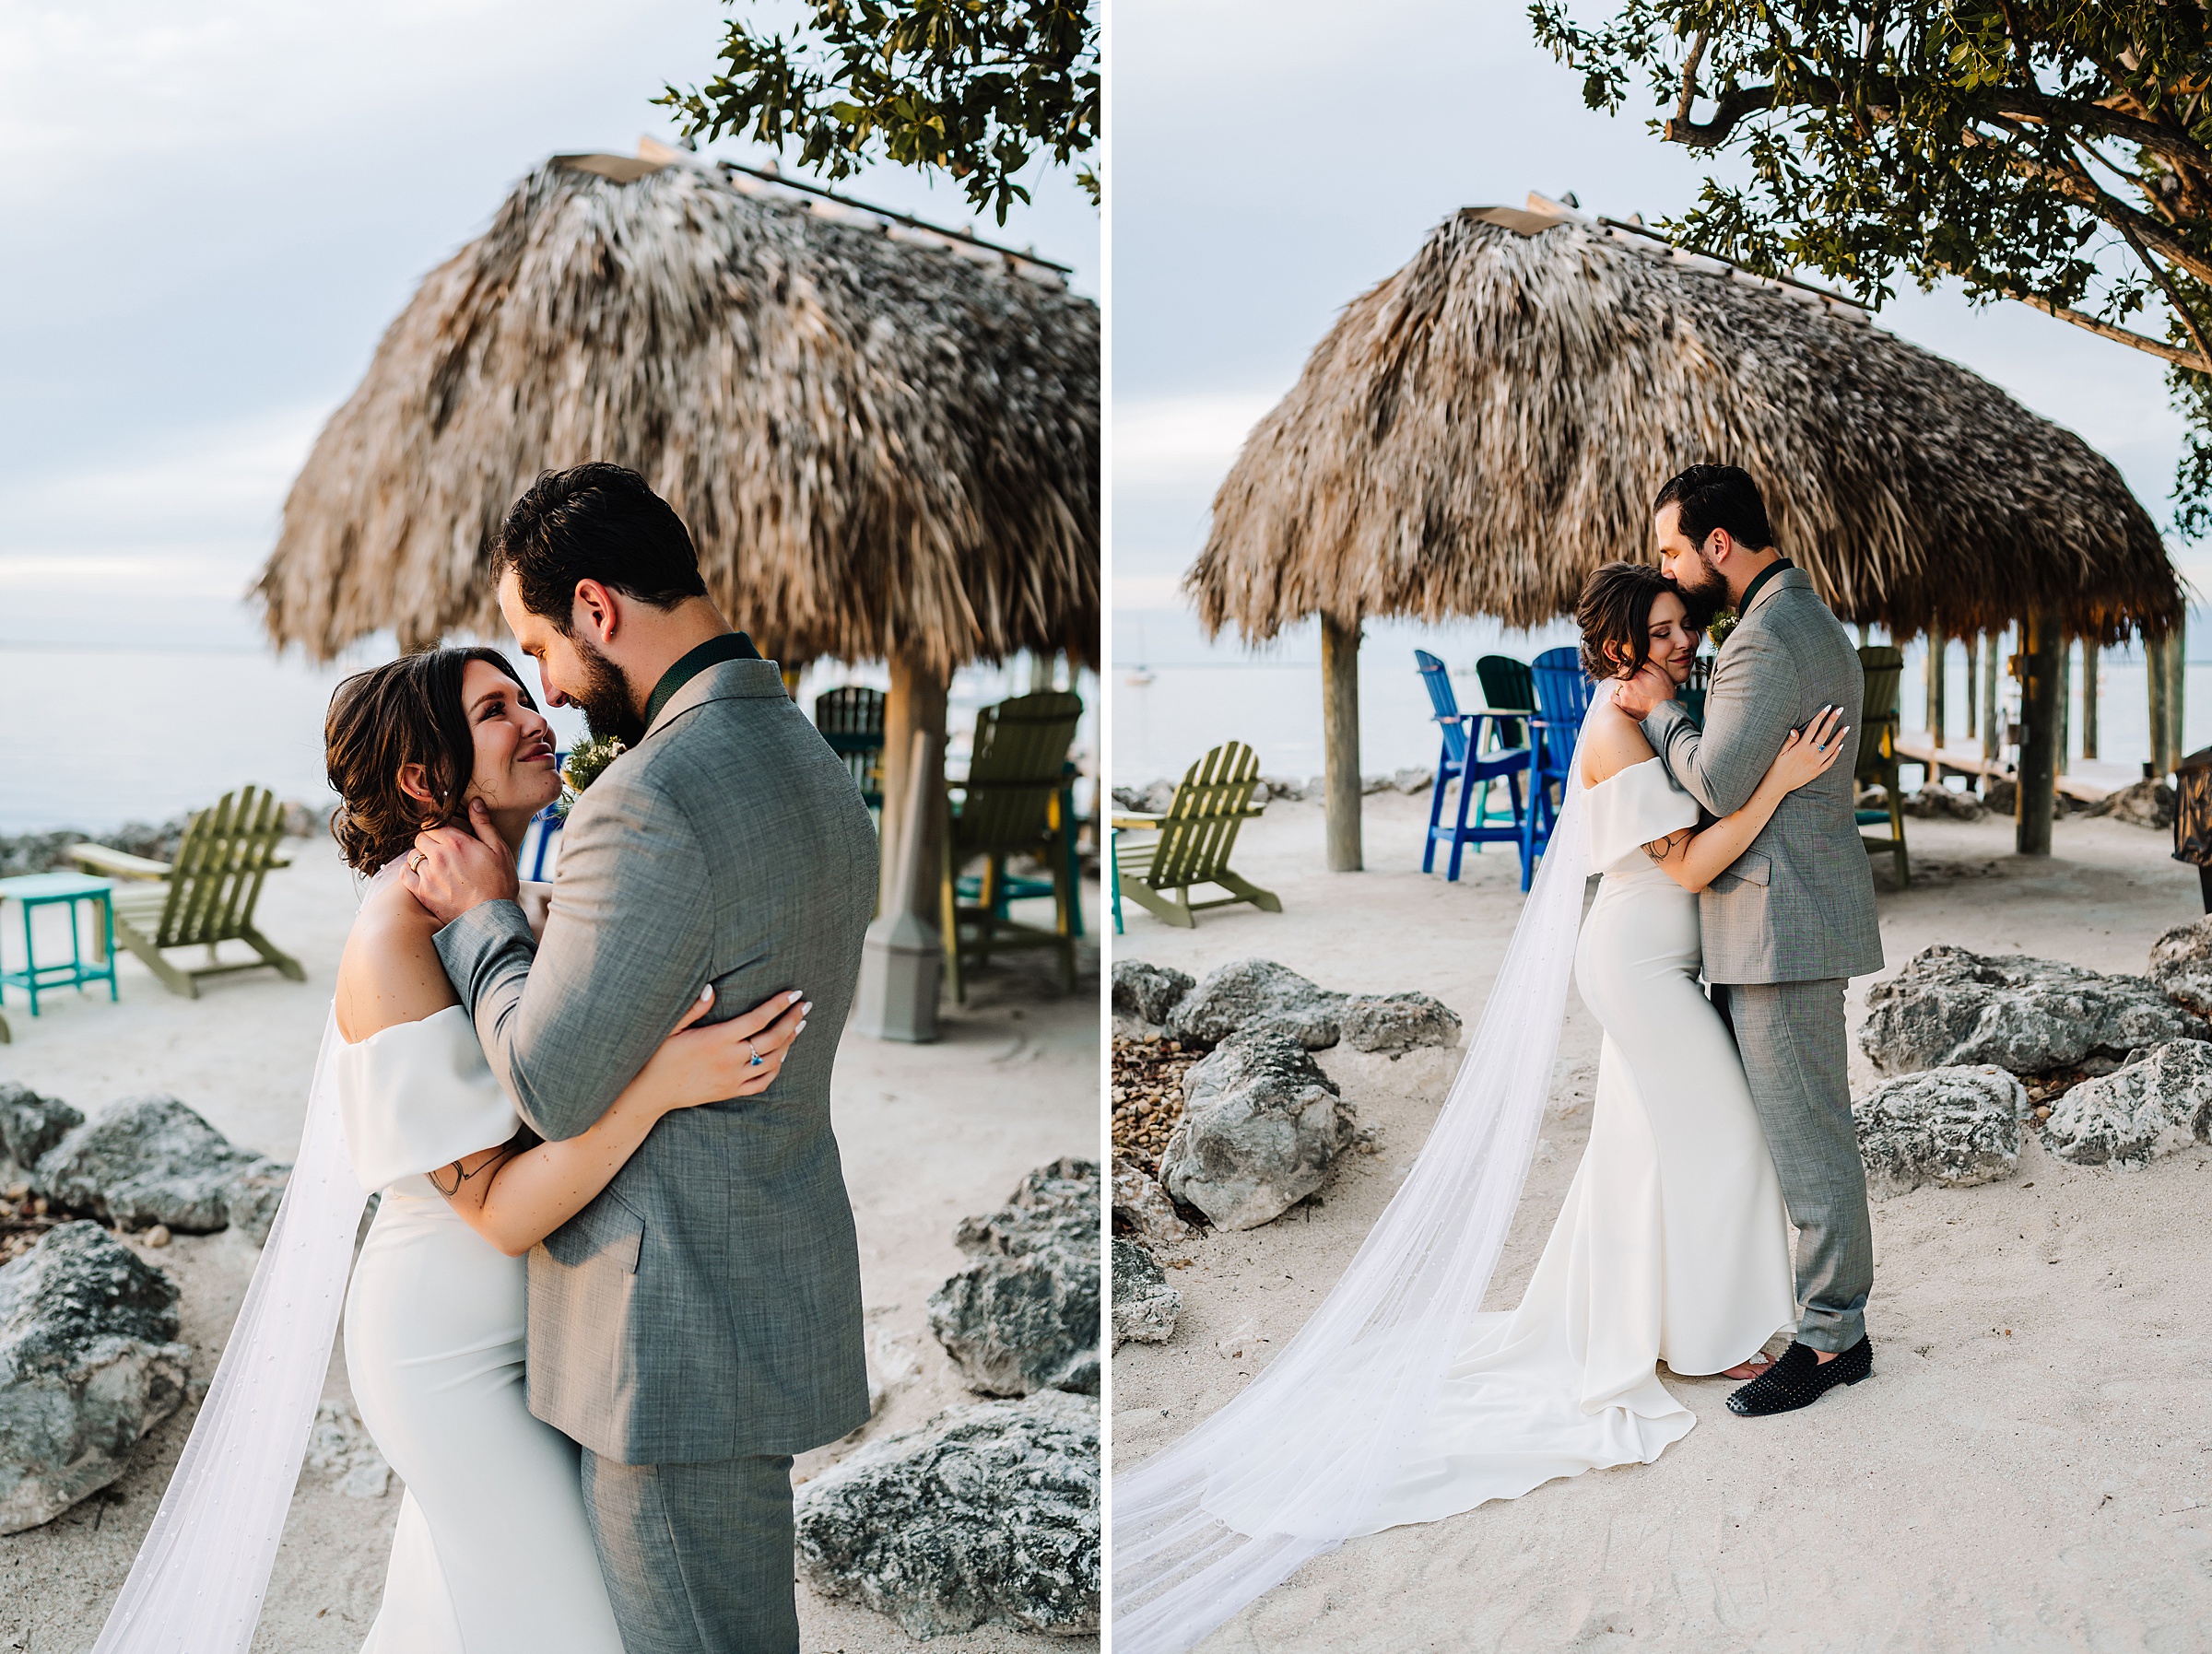 Bride and groom walking hand-in-hand on the sandy shores of Dream Bay Resort, Florida Keys.